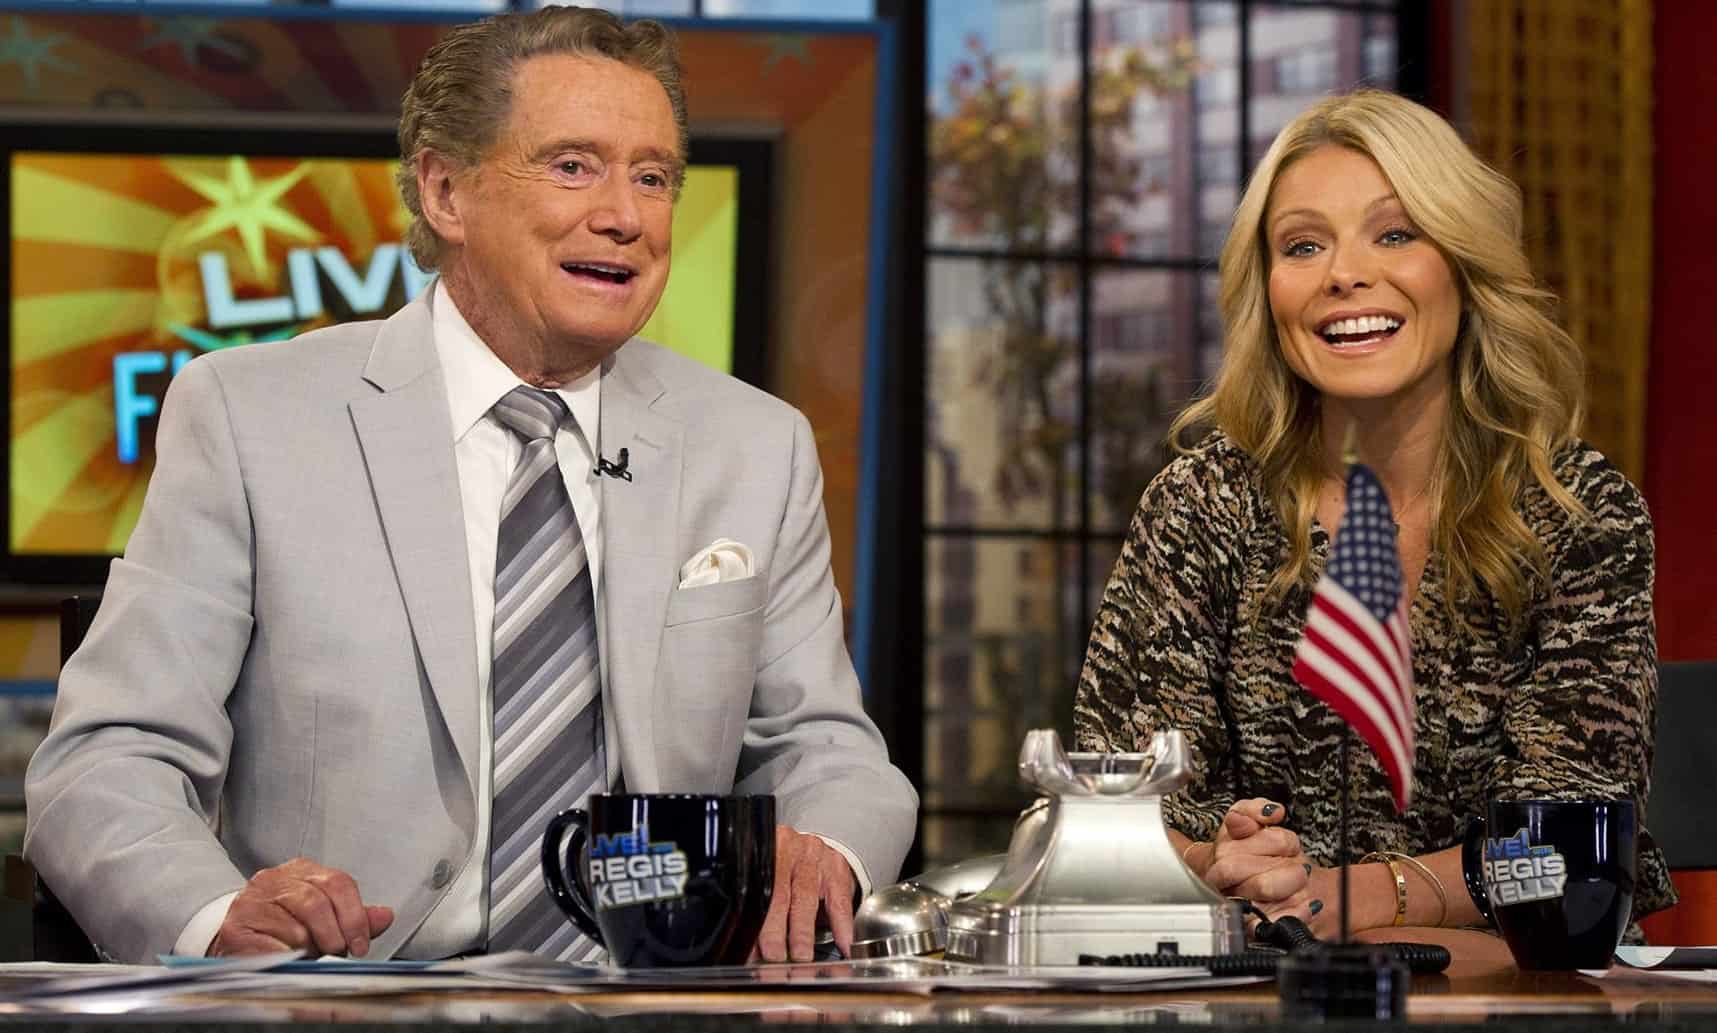 Kelly Ripa and Regis Philbin on "Live! with Regis and Kelly"